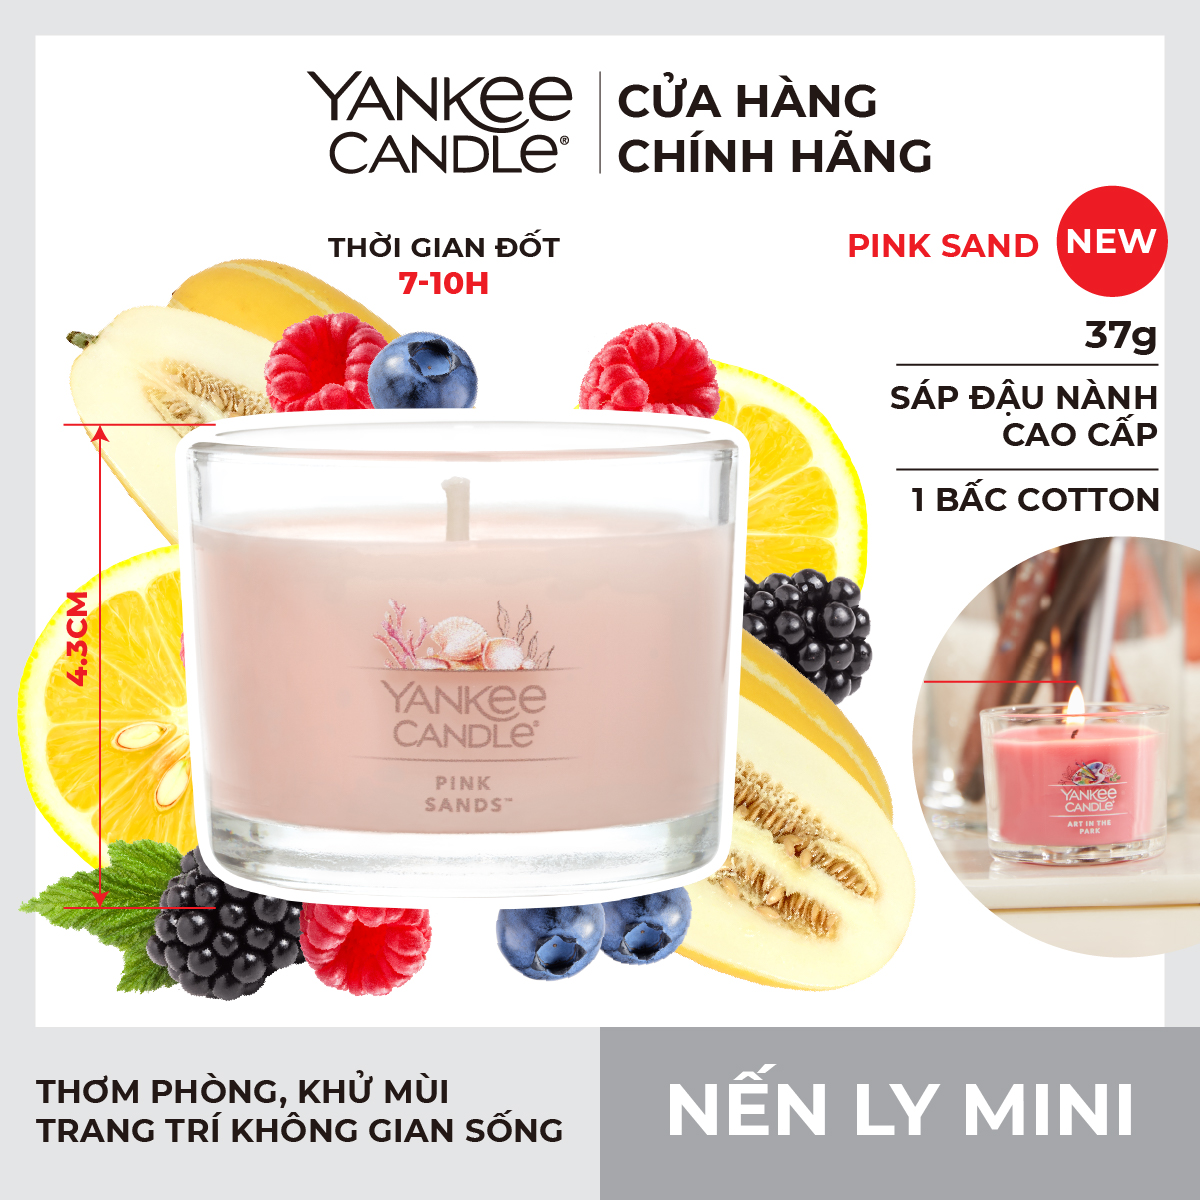 Nến ly mini Yankee Candle - Pink Sands 